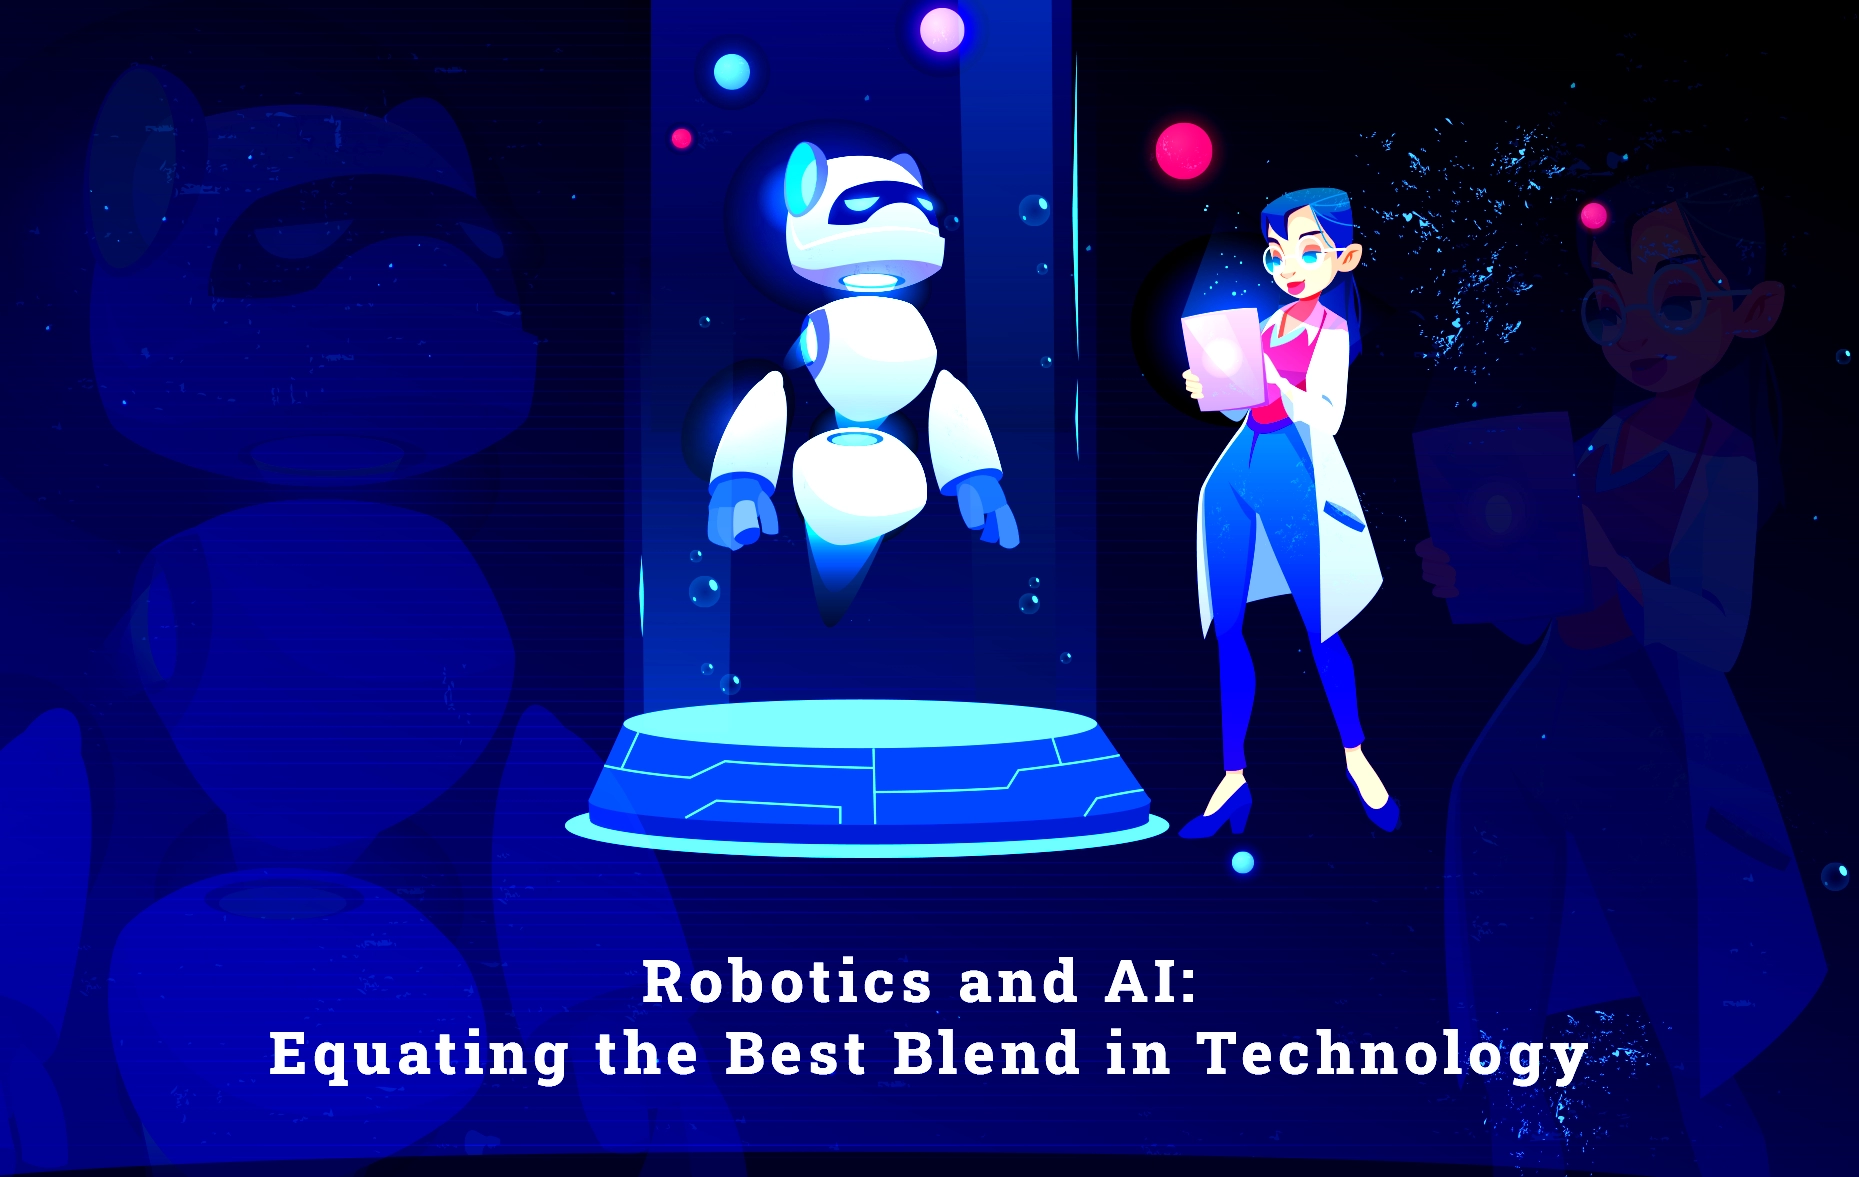 Robotics and AI: Equating the Best Blend in Technology